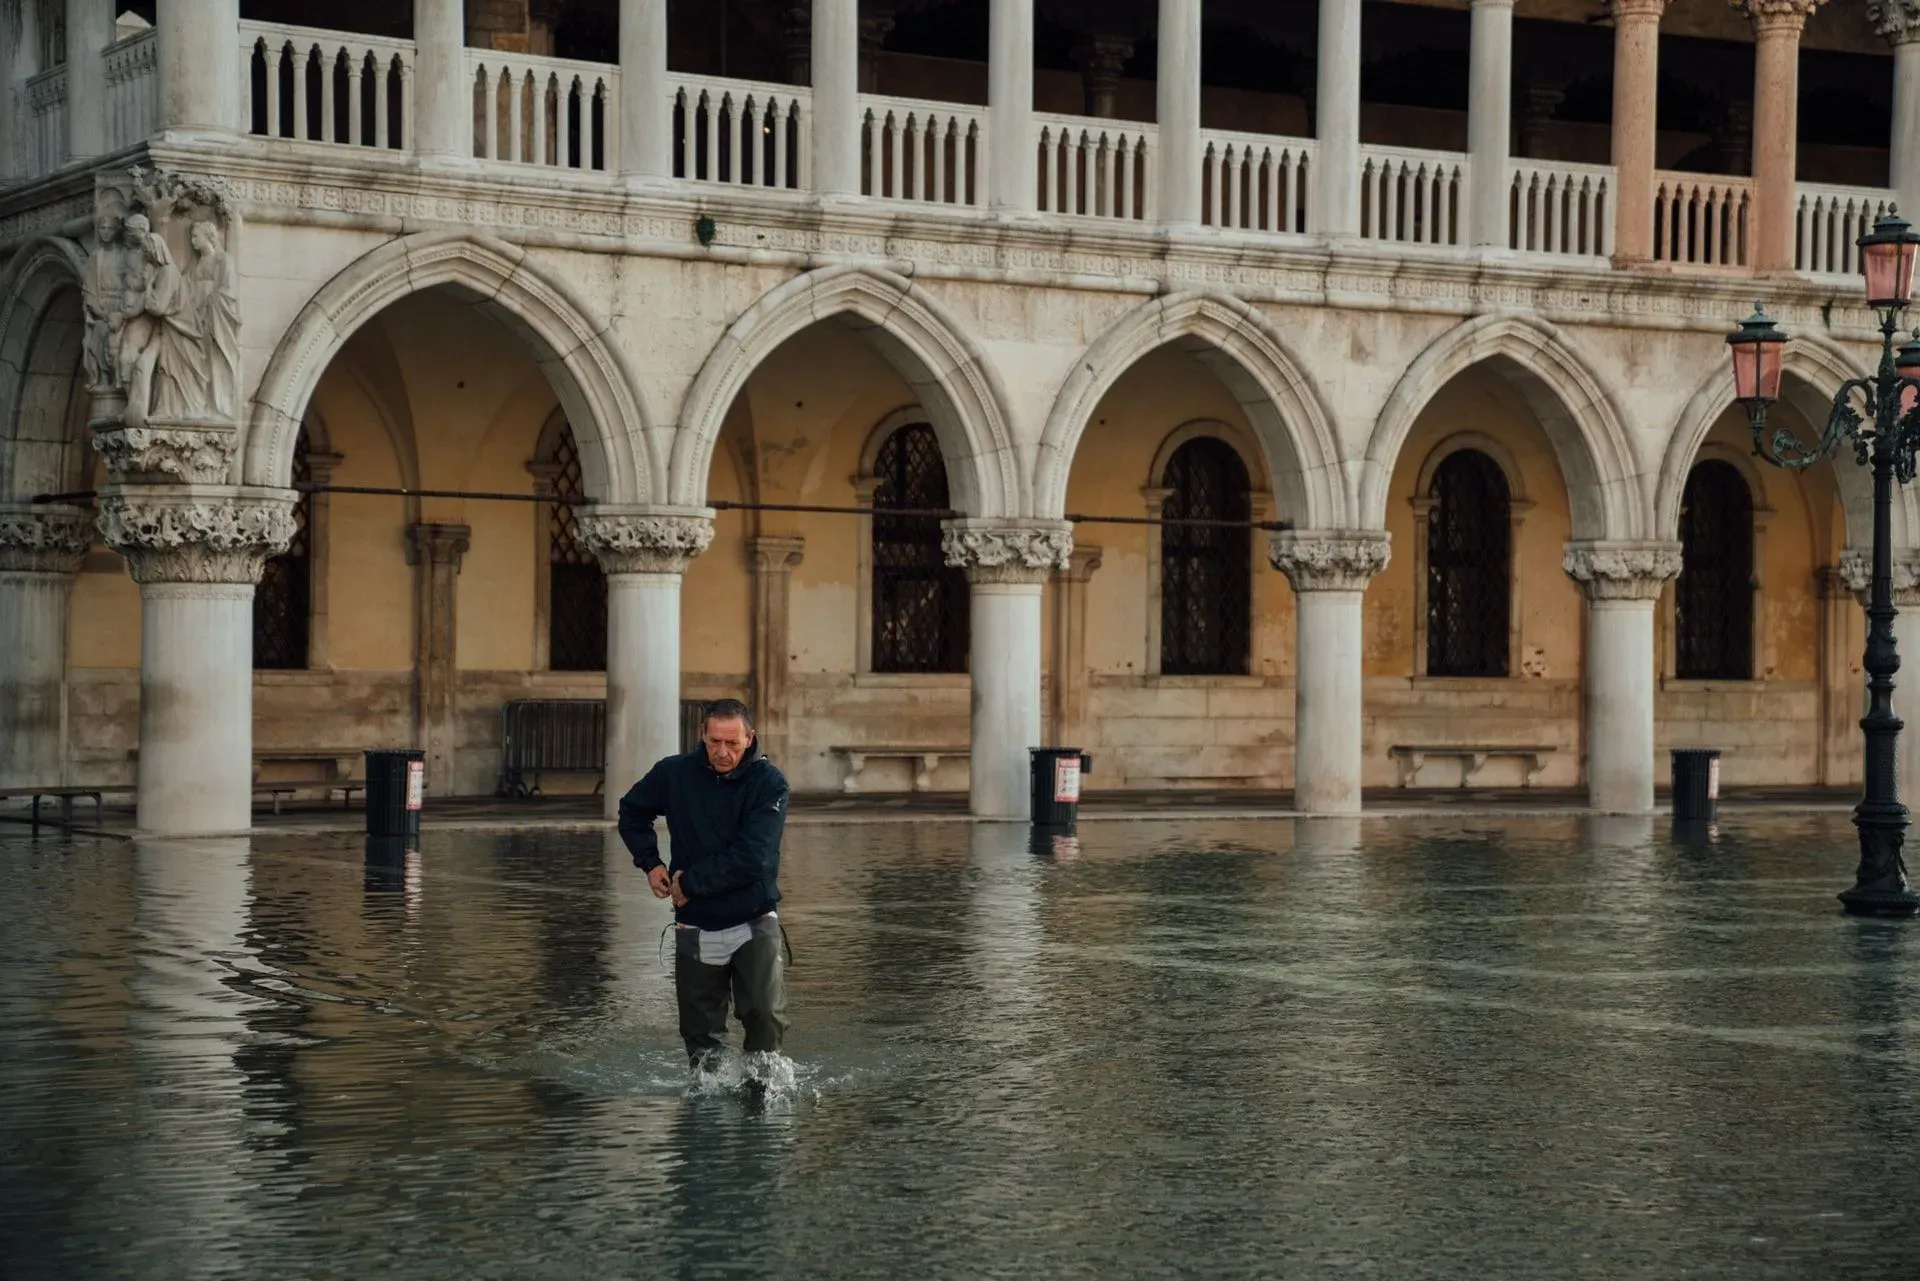 Piazza San Marco faces the brunt of the high tide due to waters coming from the shallow Adriatic Sea.